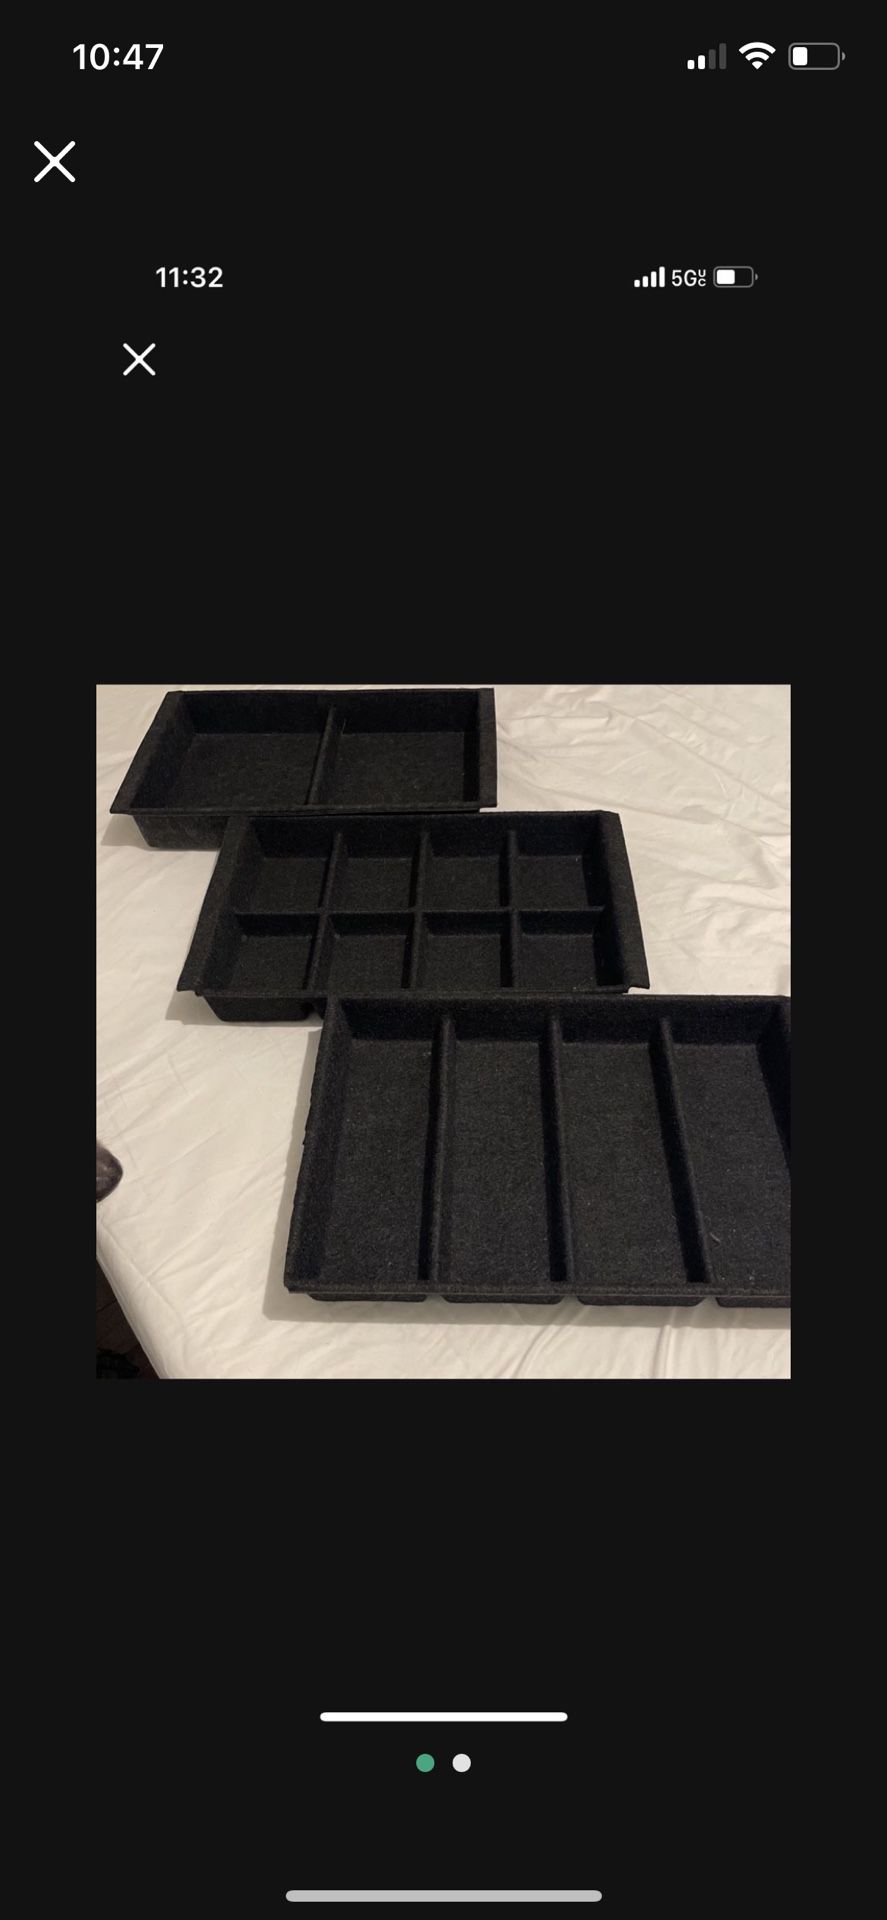 Felt Trays From Ikea All For 3.00